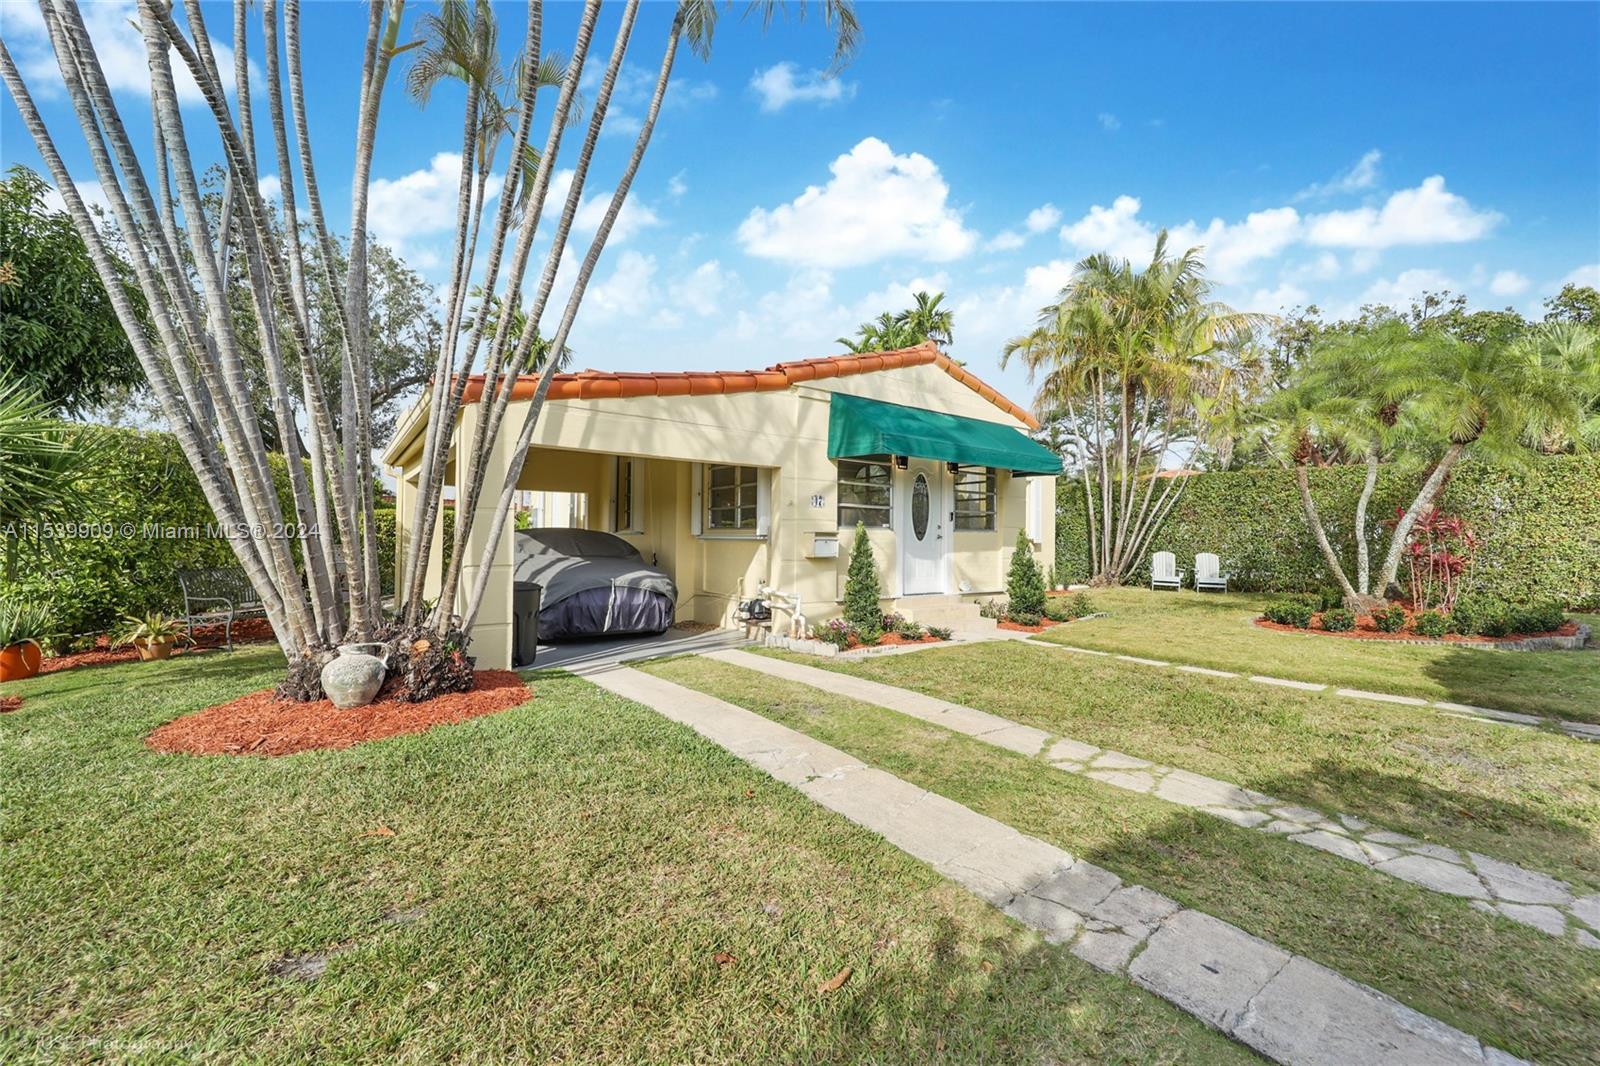 Photo of 47 Fonseca Ave in Coral Gables, FL